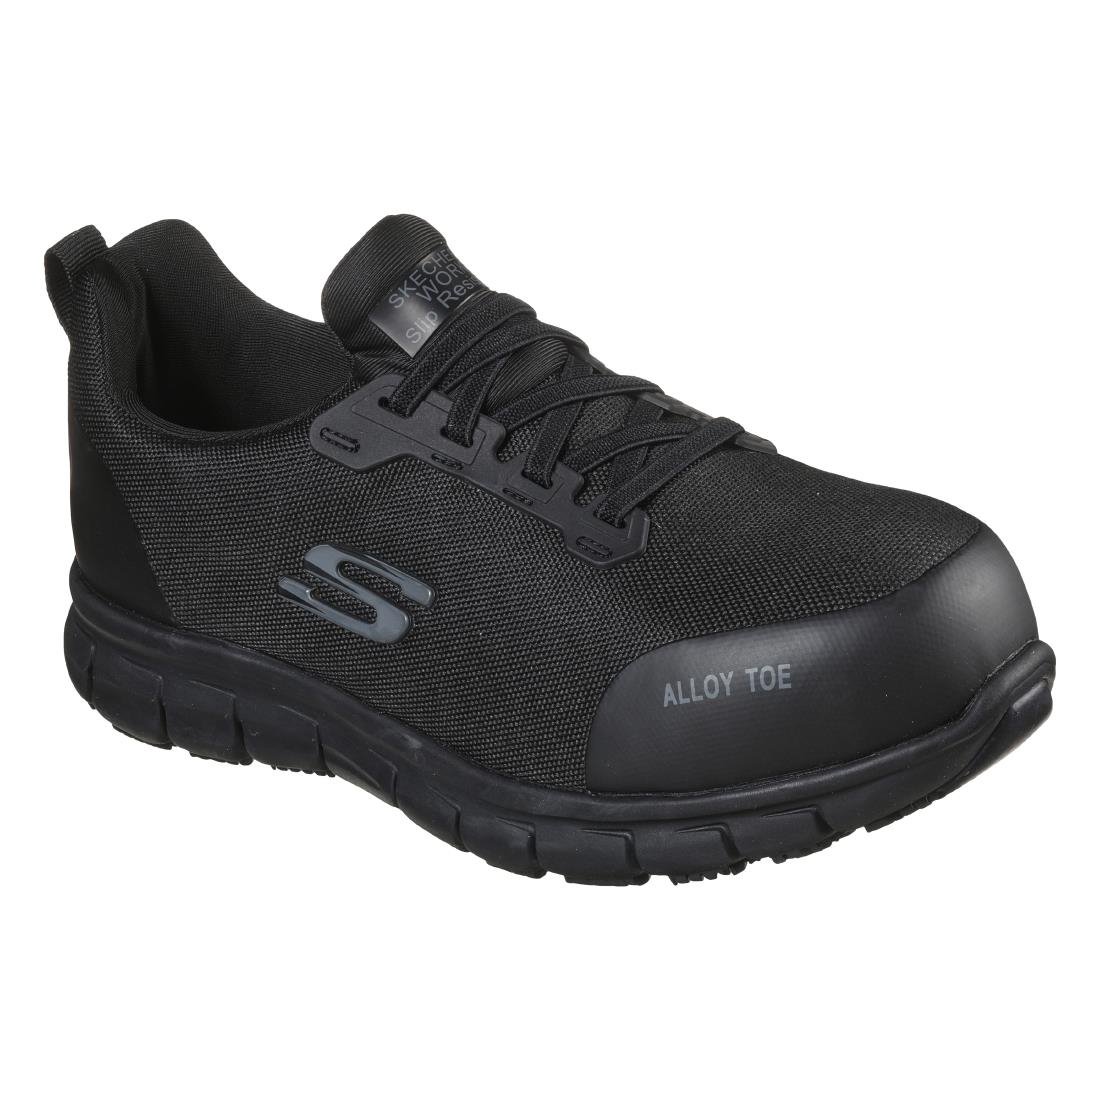 BB670-39 Skechers Womens Safety Shoe with Steel Toe Cap - Size 39 (UK 6) JD Catering Equipment Solutions Ltd